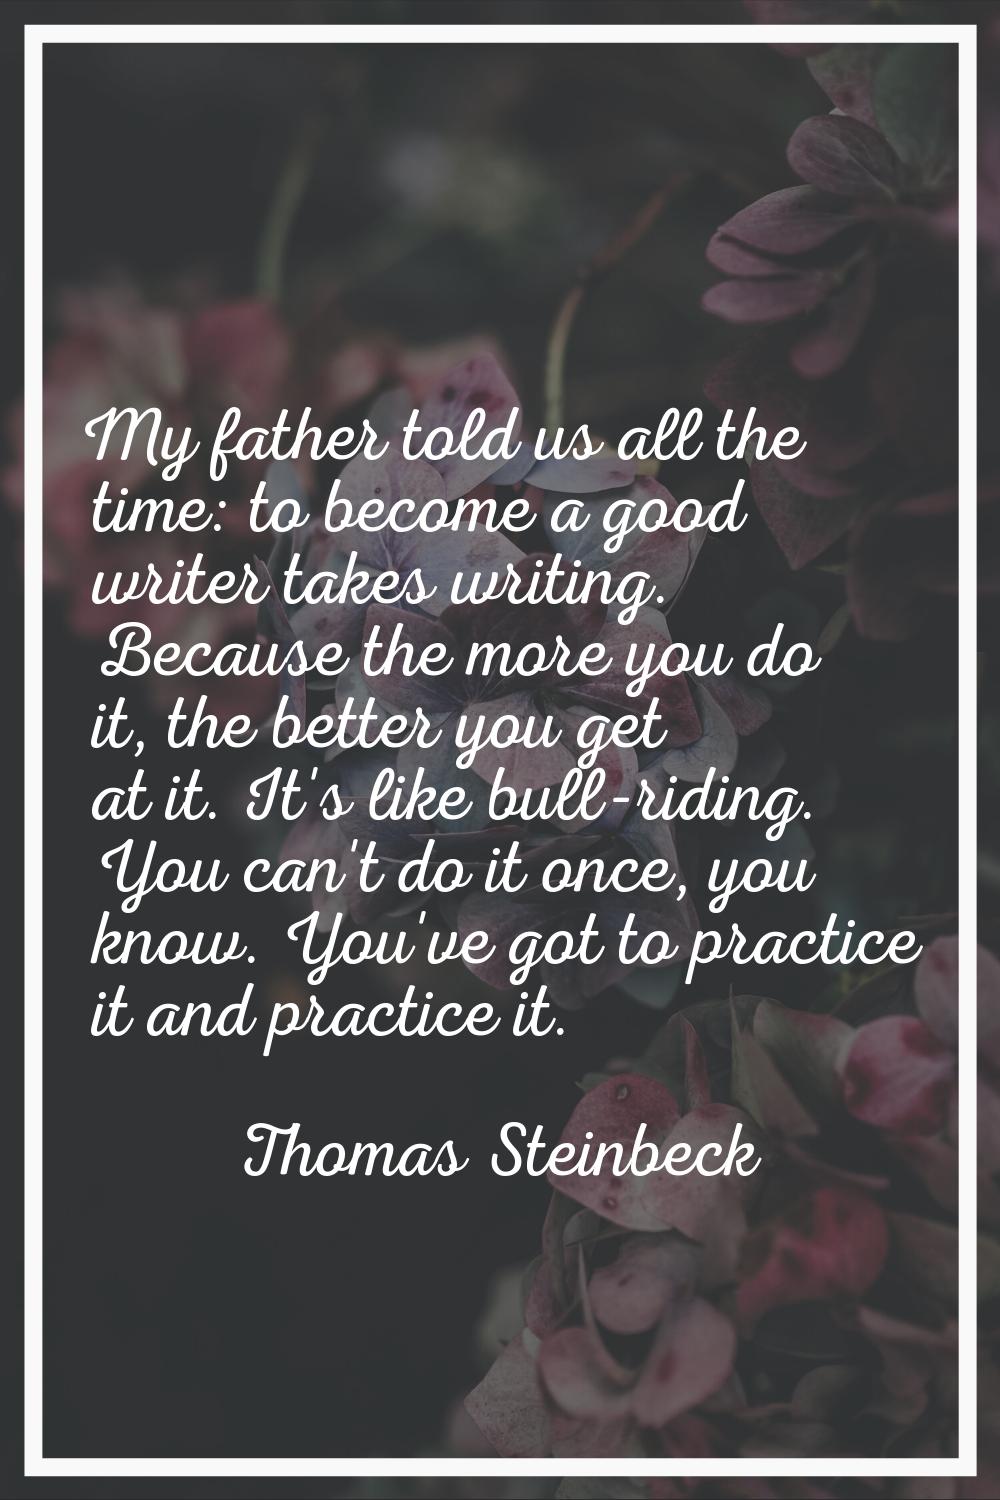 My father told us all the time: to become a good writer takes writing. Because the more you do it, 